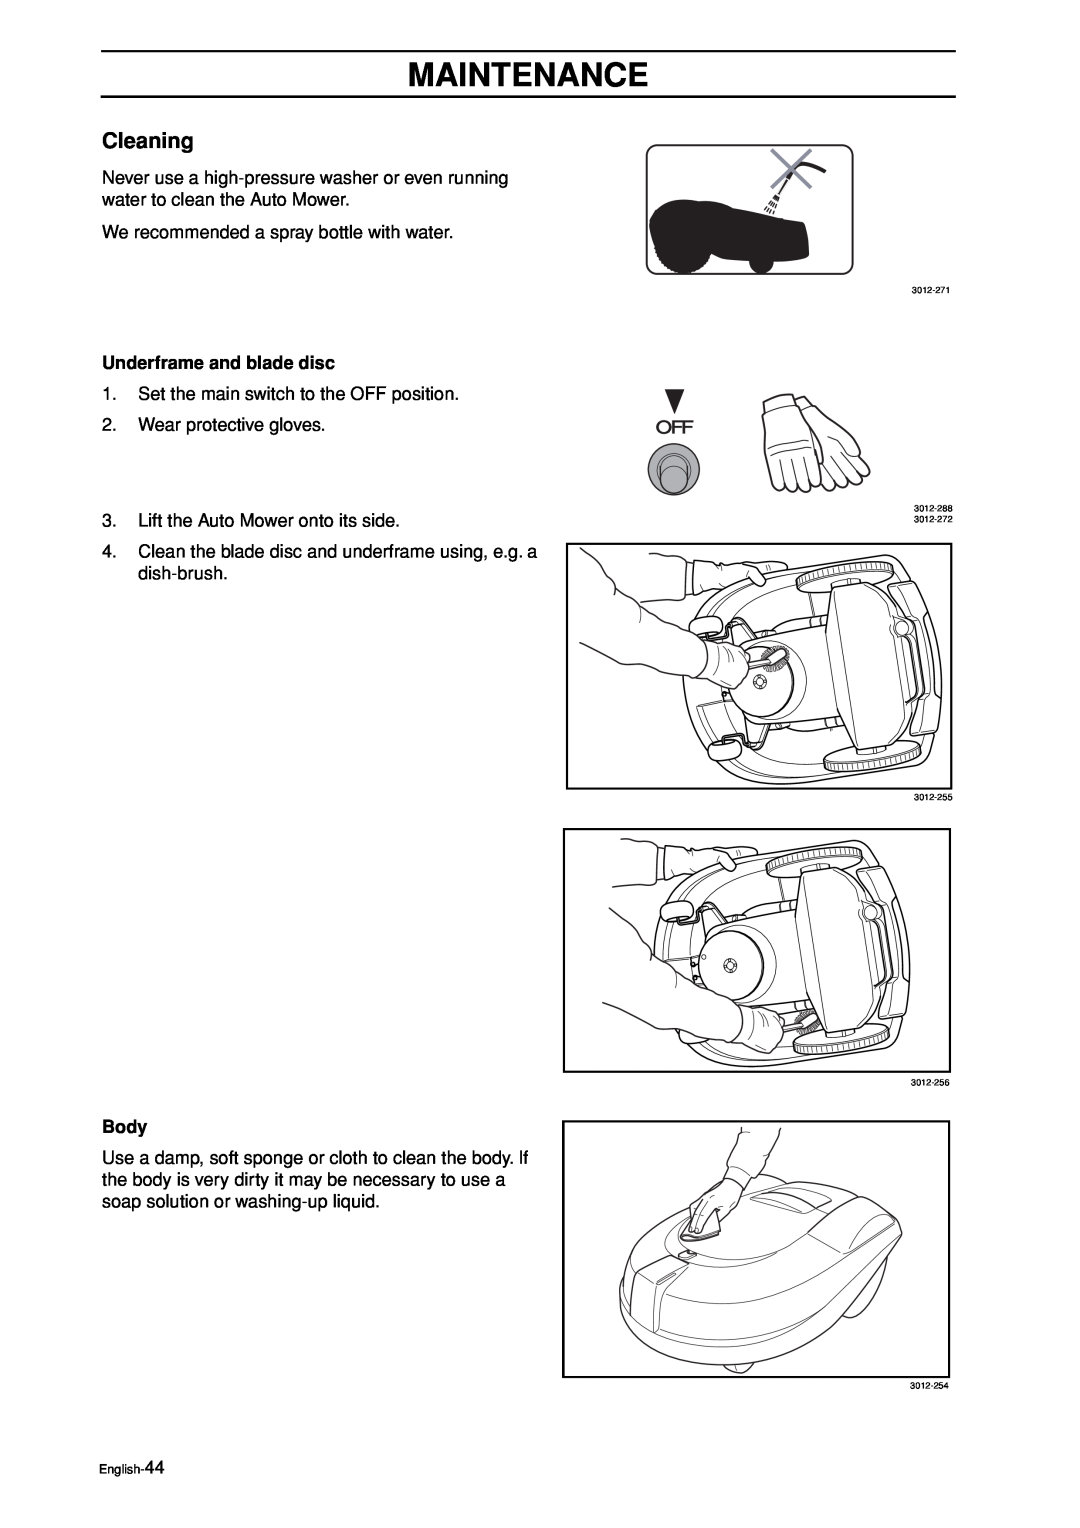 Husqvarna Auto Mower manual Cleaning, Maintenance, Underframe and blade disc, Body 